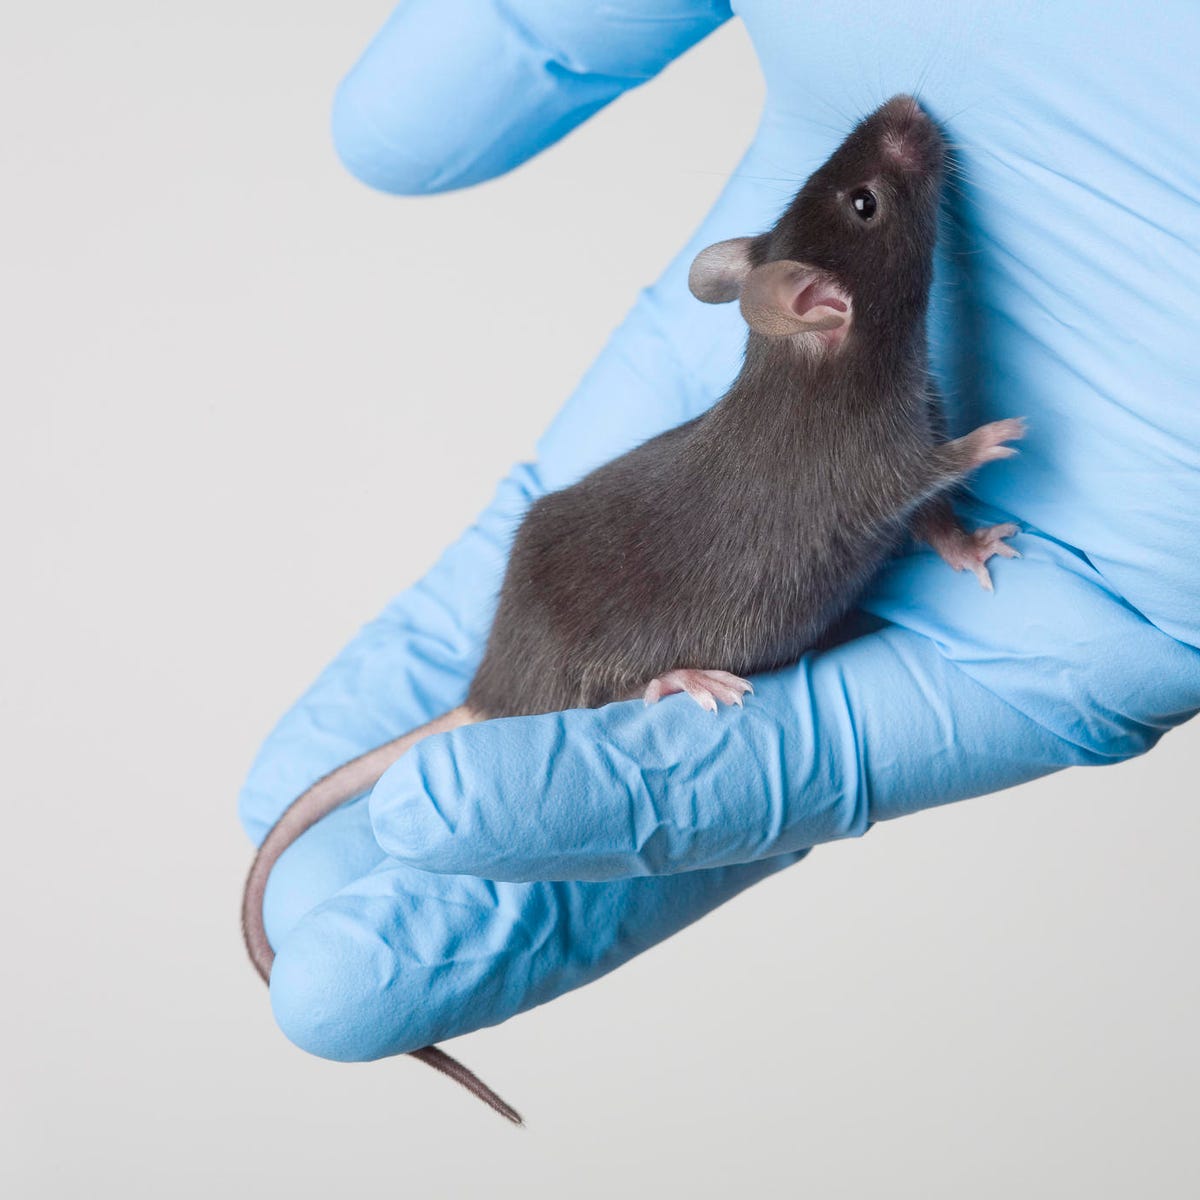 Killing Mice Is Cruel! The Best Ways To Get Rid Of Them — Every